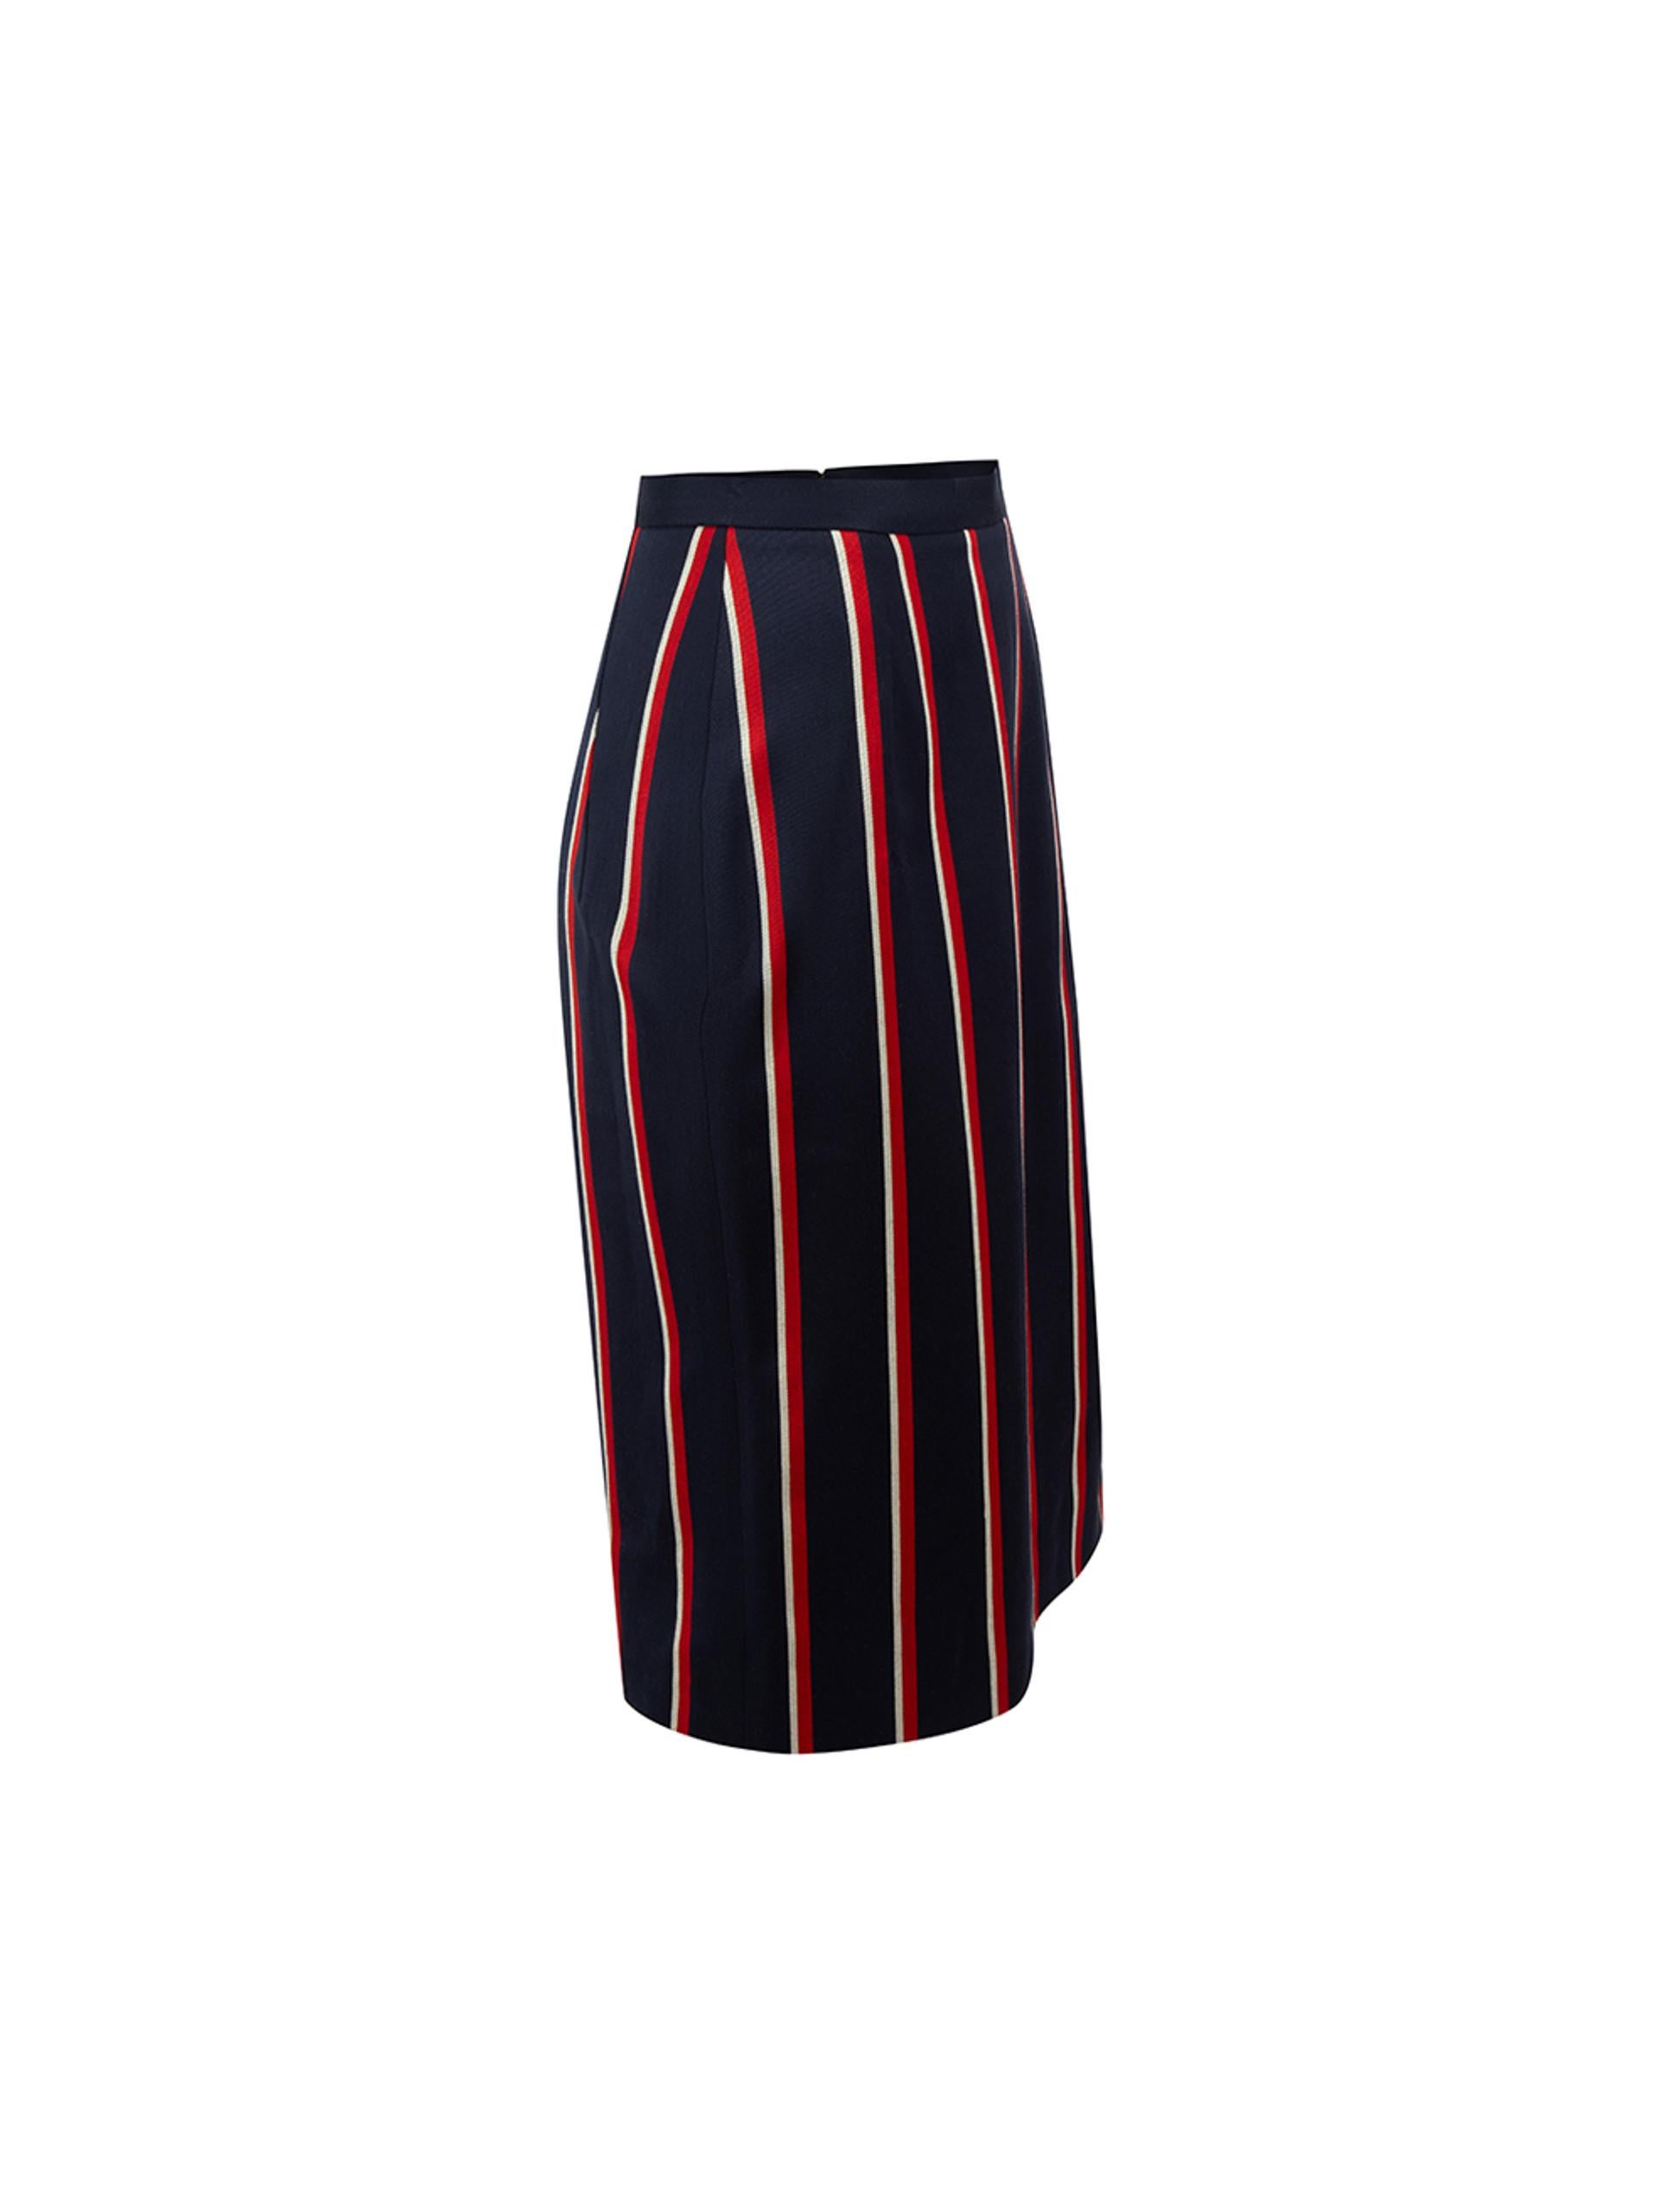 CONDITION is Good. Minor wear to skirt is evident. Light wear to outer fabric with a number of small abrasions on the lower half of this used Altuzarra designer resale item.
 
 Details
 Navy
 Wool
 Pencil skirt
 Red and grey striped pattern
 Knee